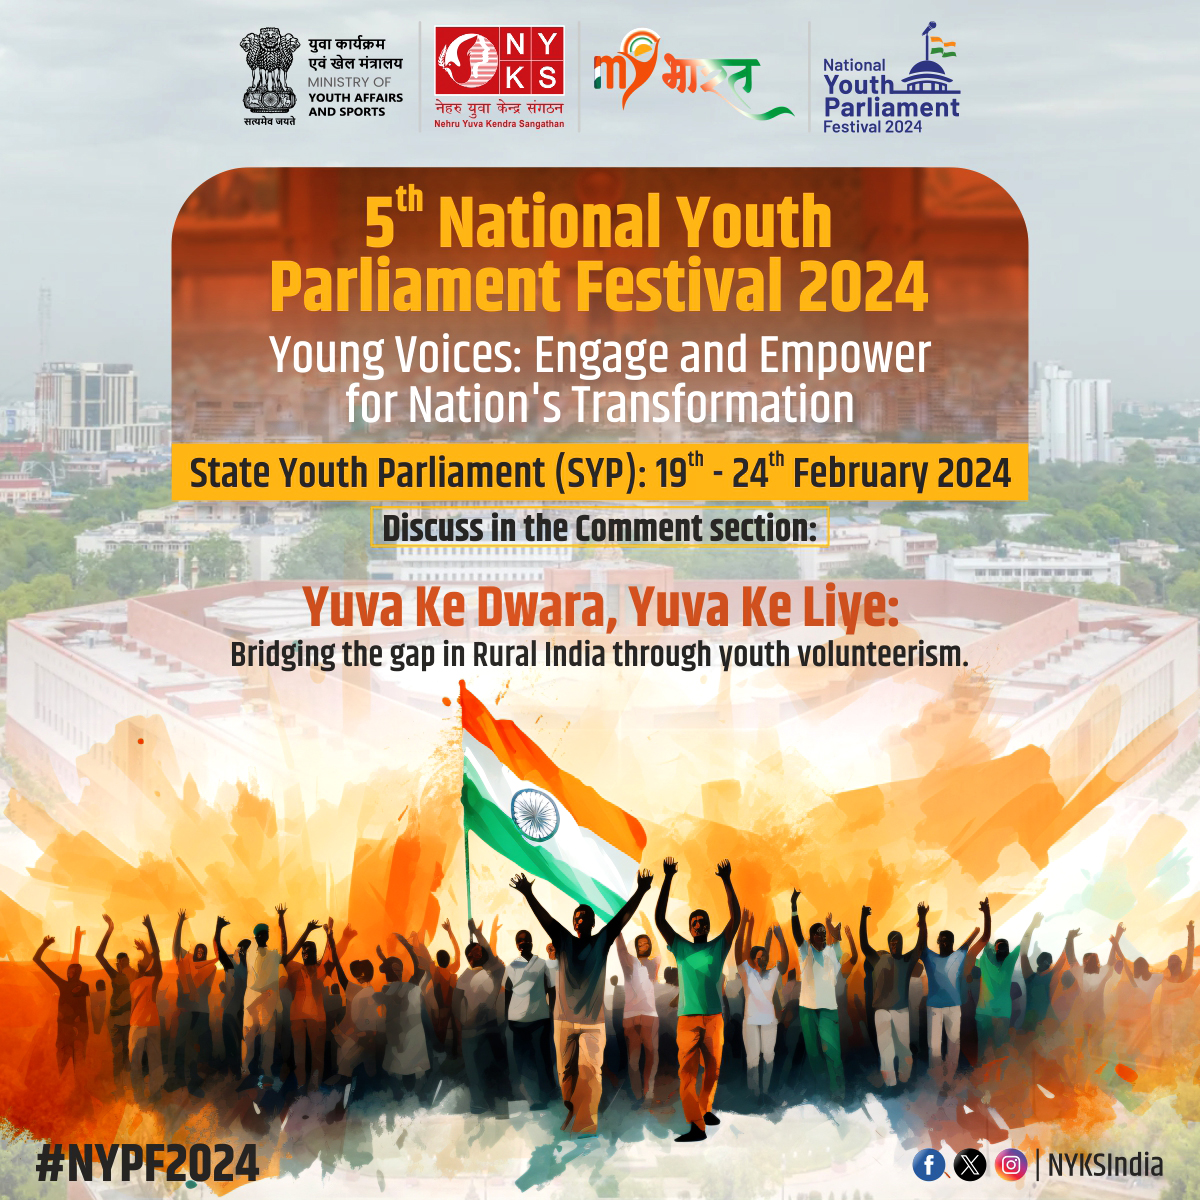 Get ready to witness the power of youth activism at the State Youth Parliament! Let's ignite change, one community at a time! 💪 #NYPF2024 #YouthActivism #BridgingTheGap #YouthEmpowerment #NYKS